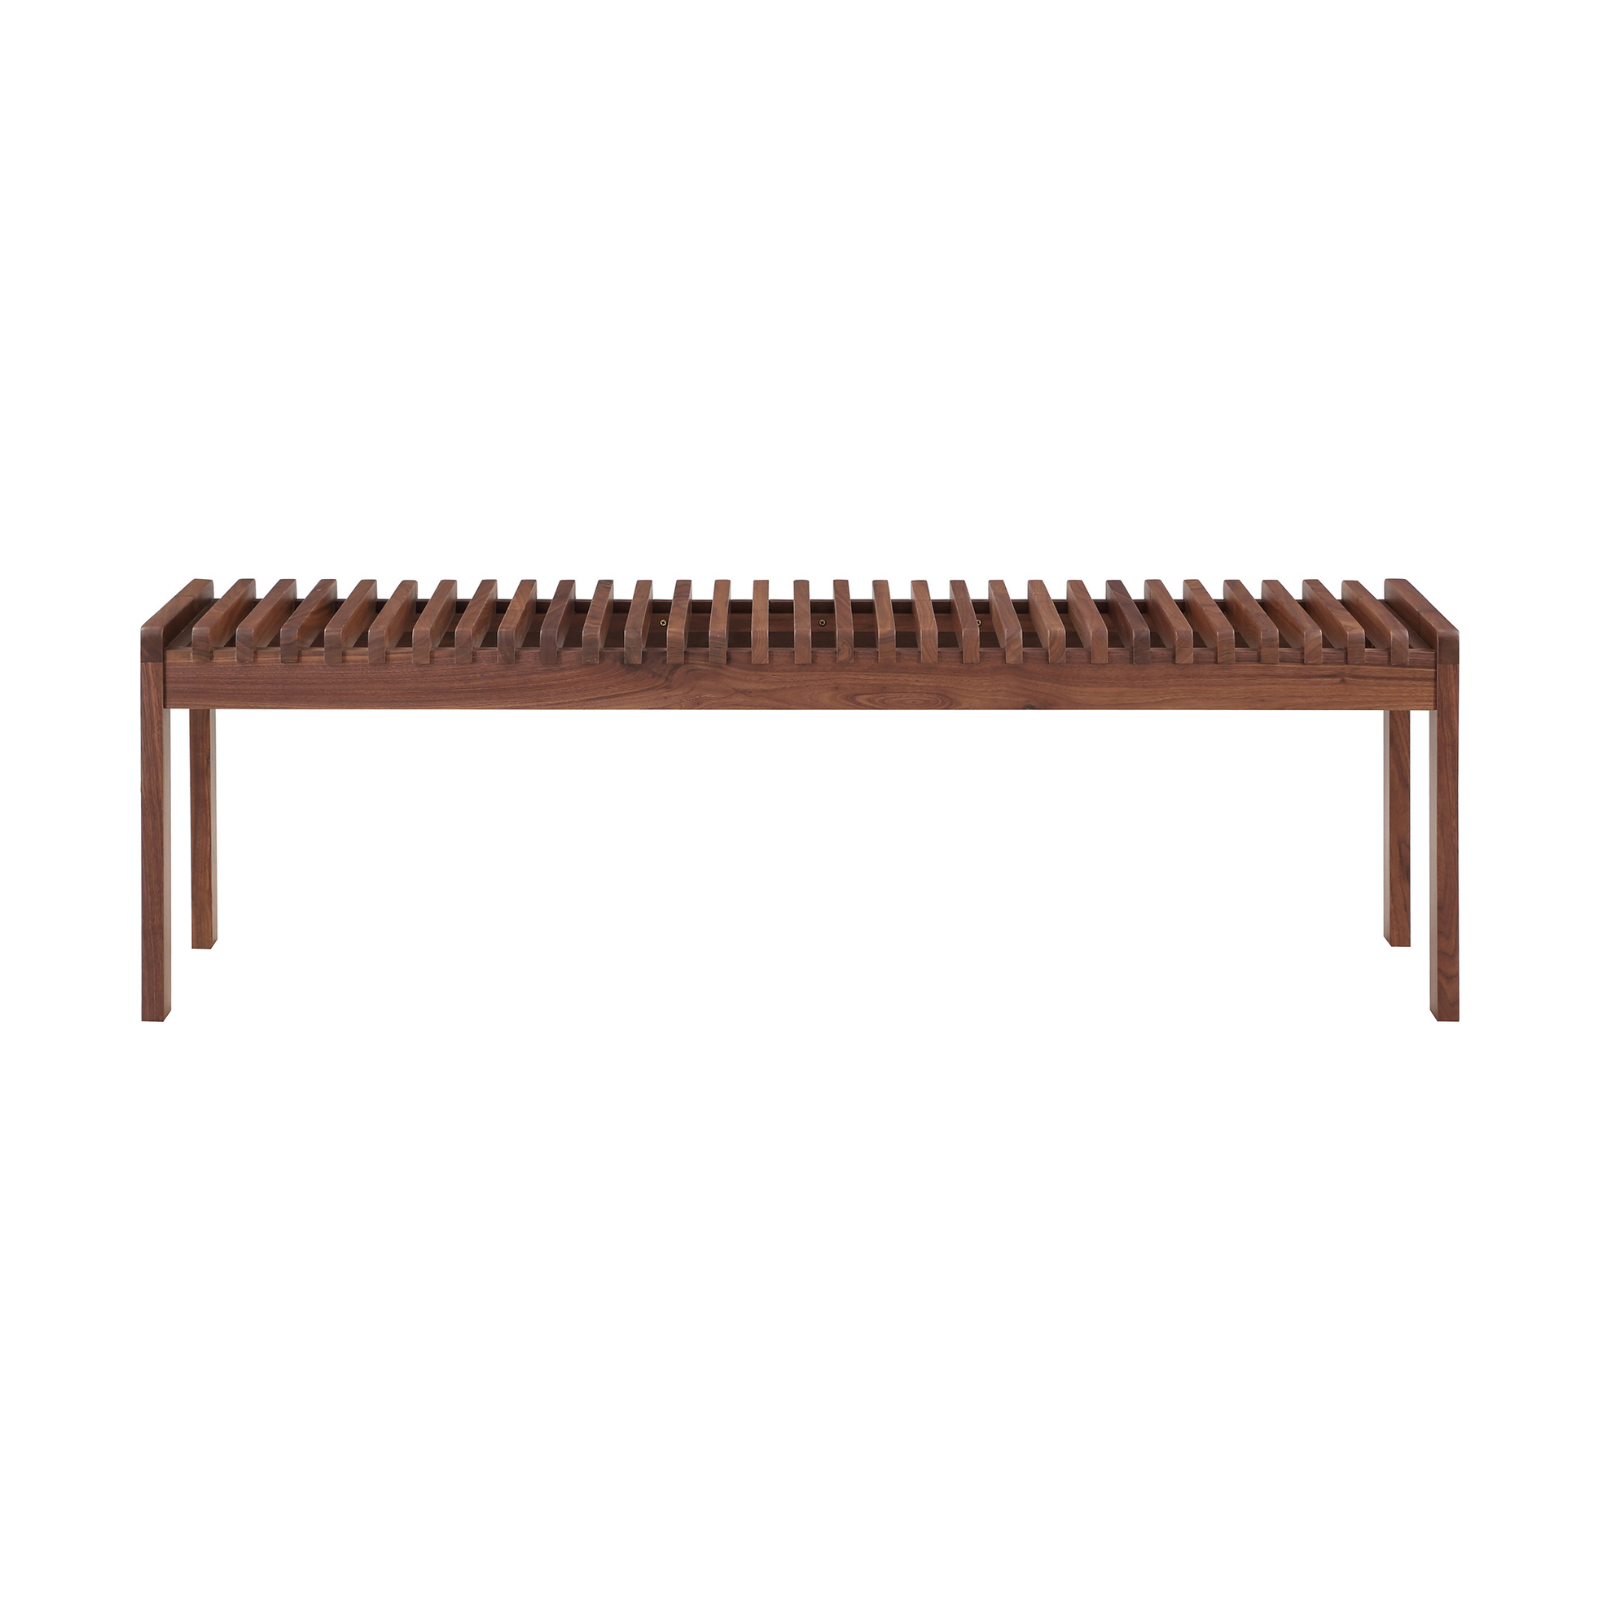 Hailey Bench - Brown